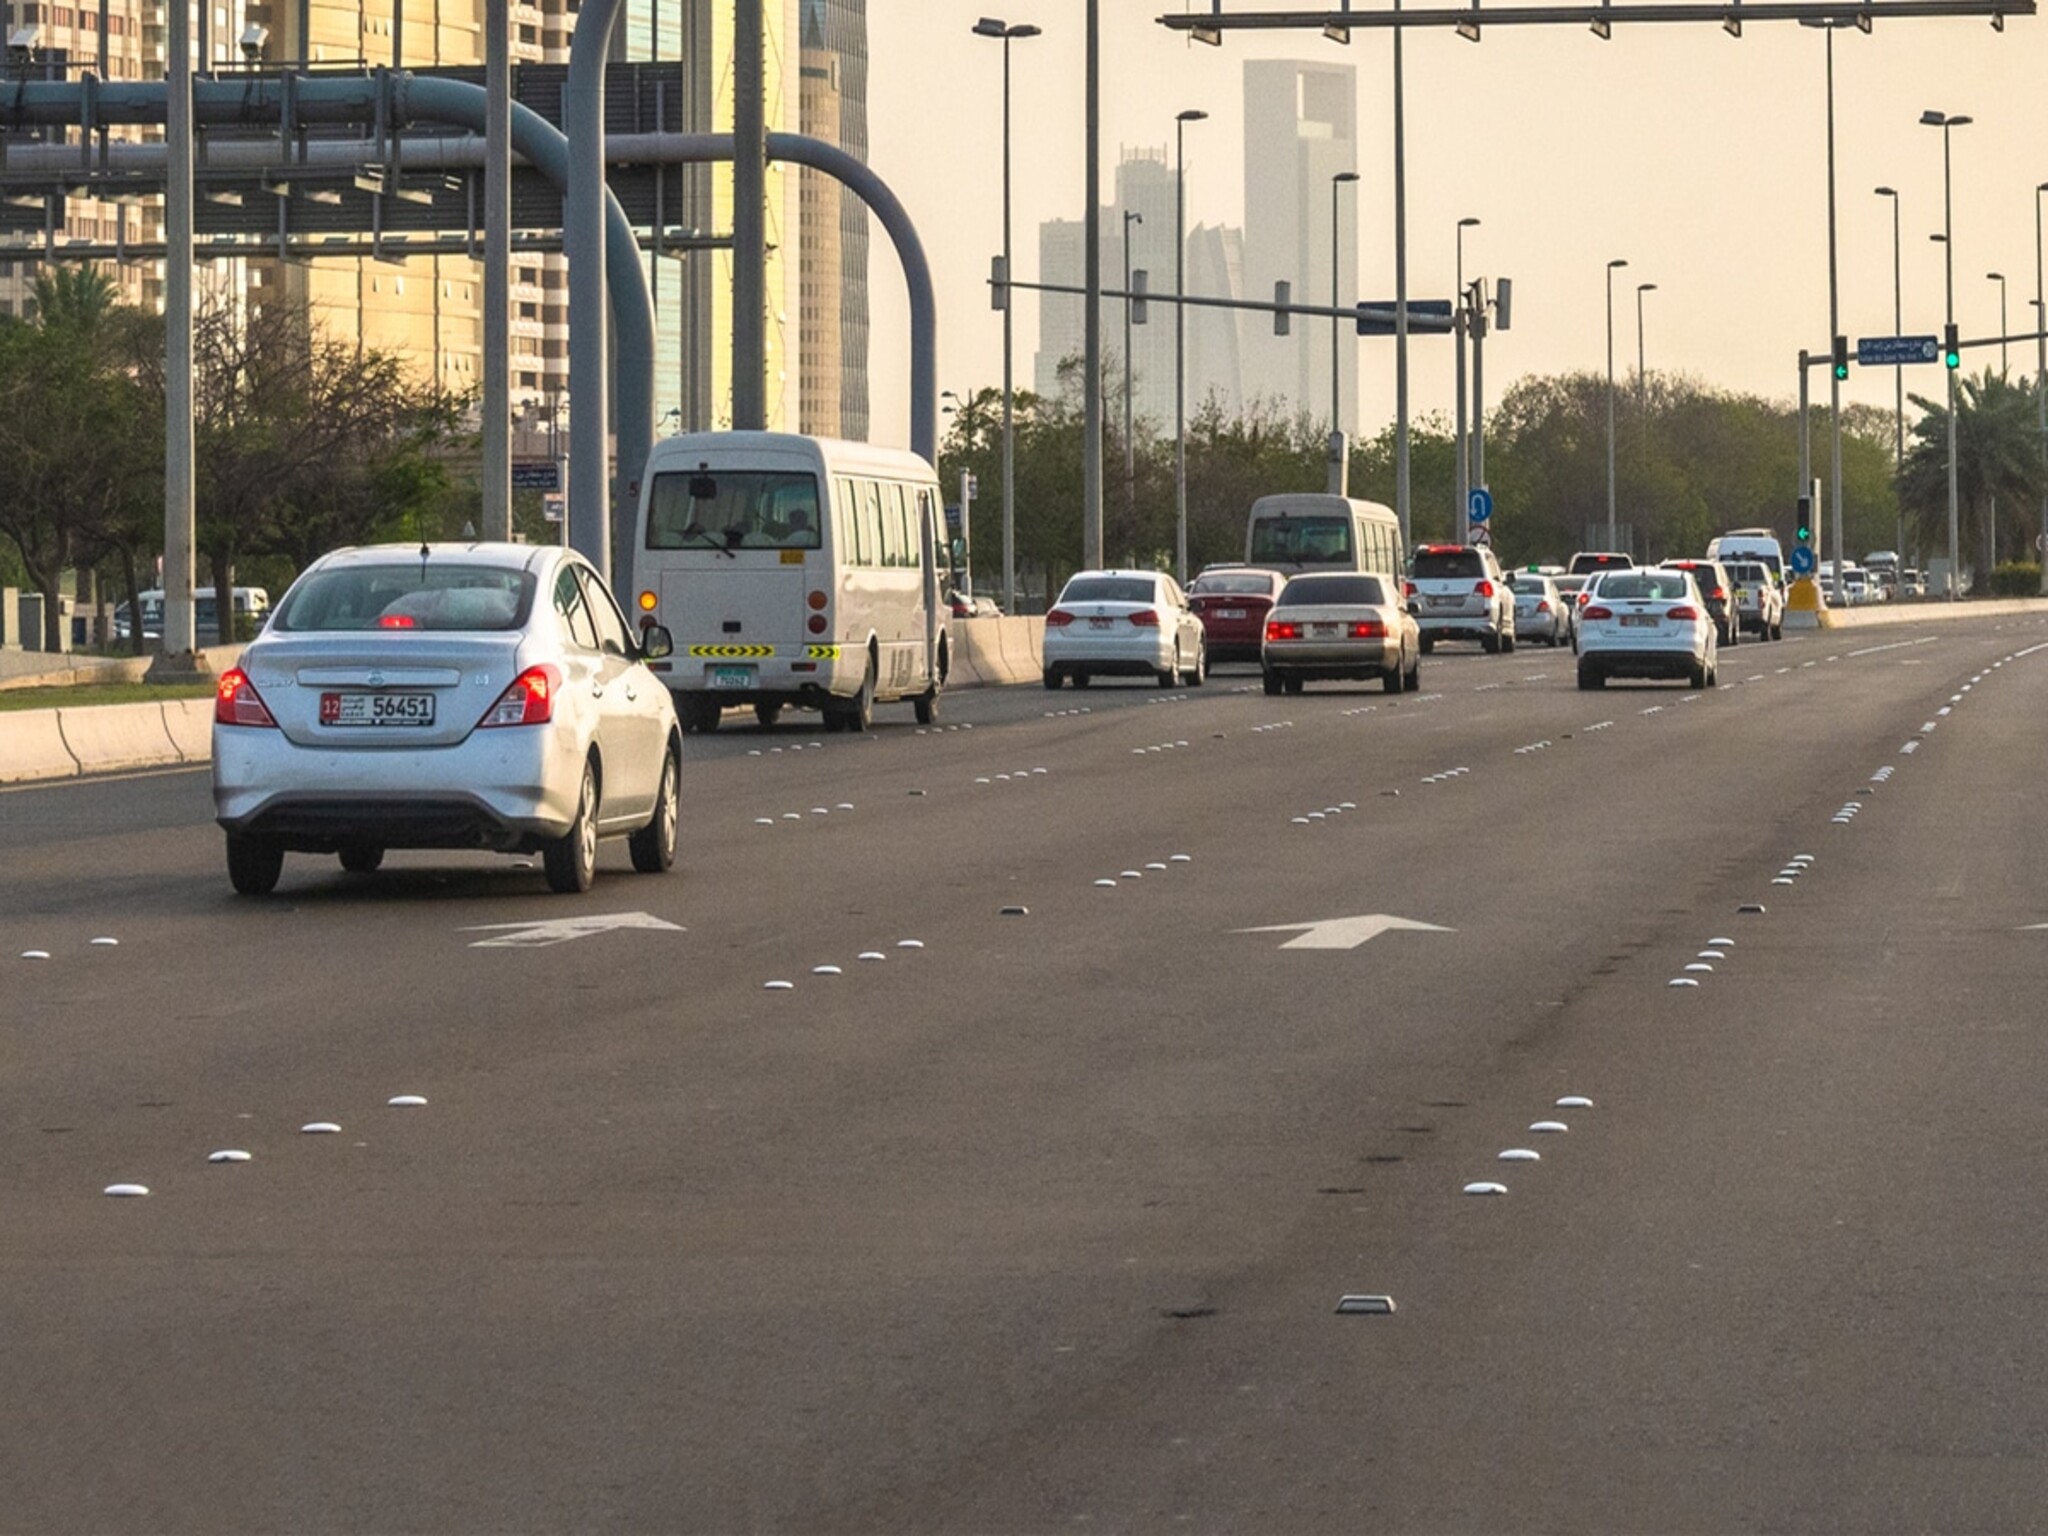 UAE driving license: Who is responsible for paying traffic fines for trainees in the UAE